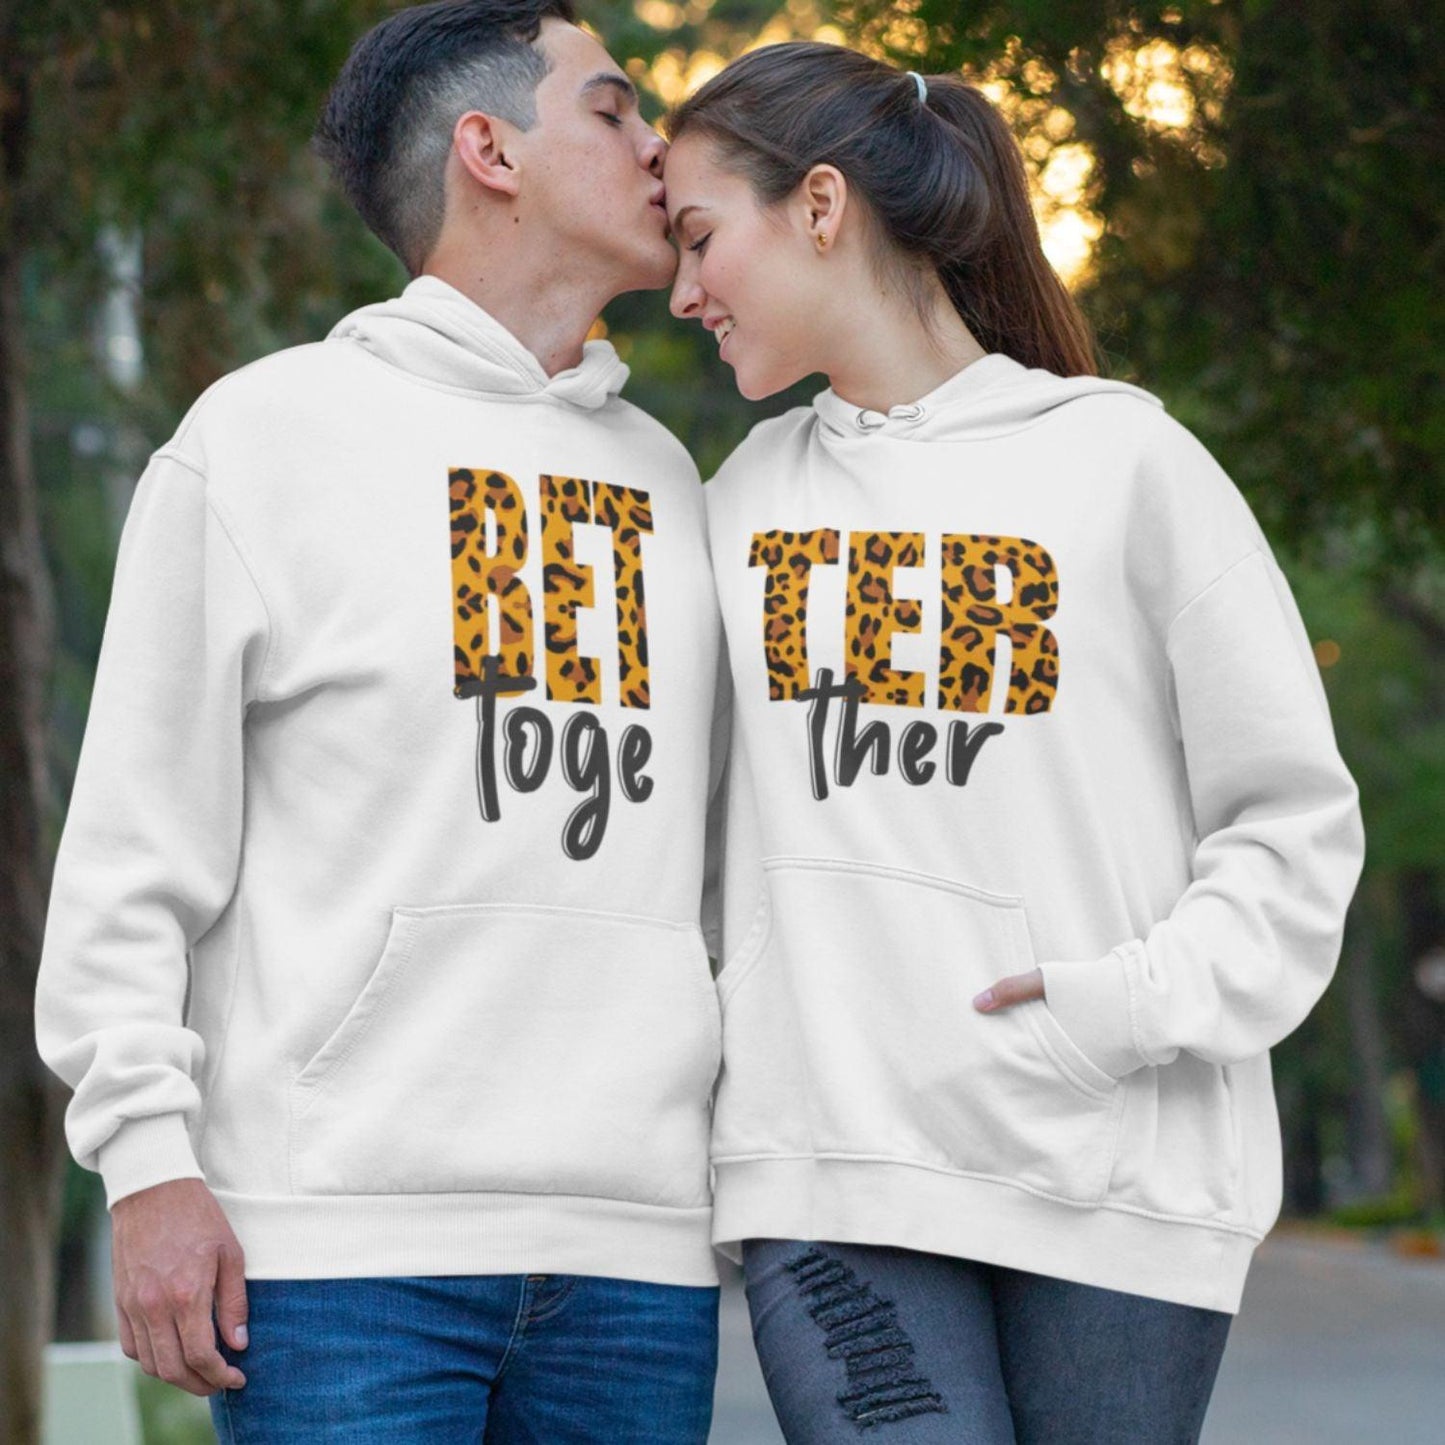 Matching Set: Better Together, Cute Couple Outfit, Gift for Lovers, Boyfriend & Girlfriend - 4Lovebirds